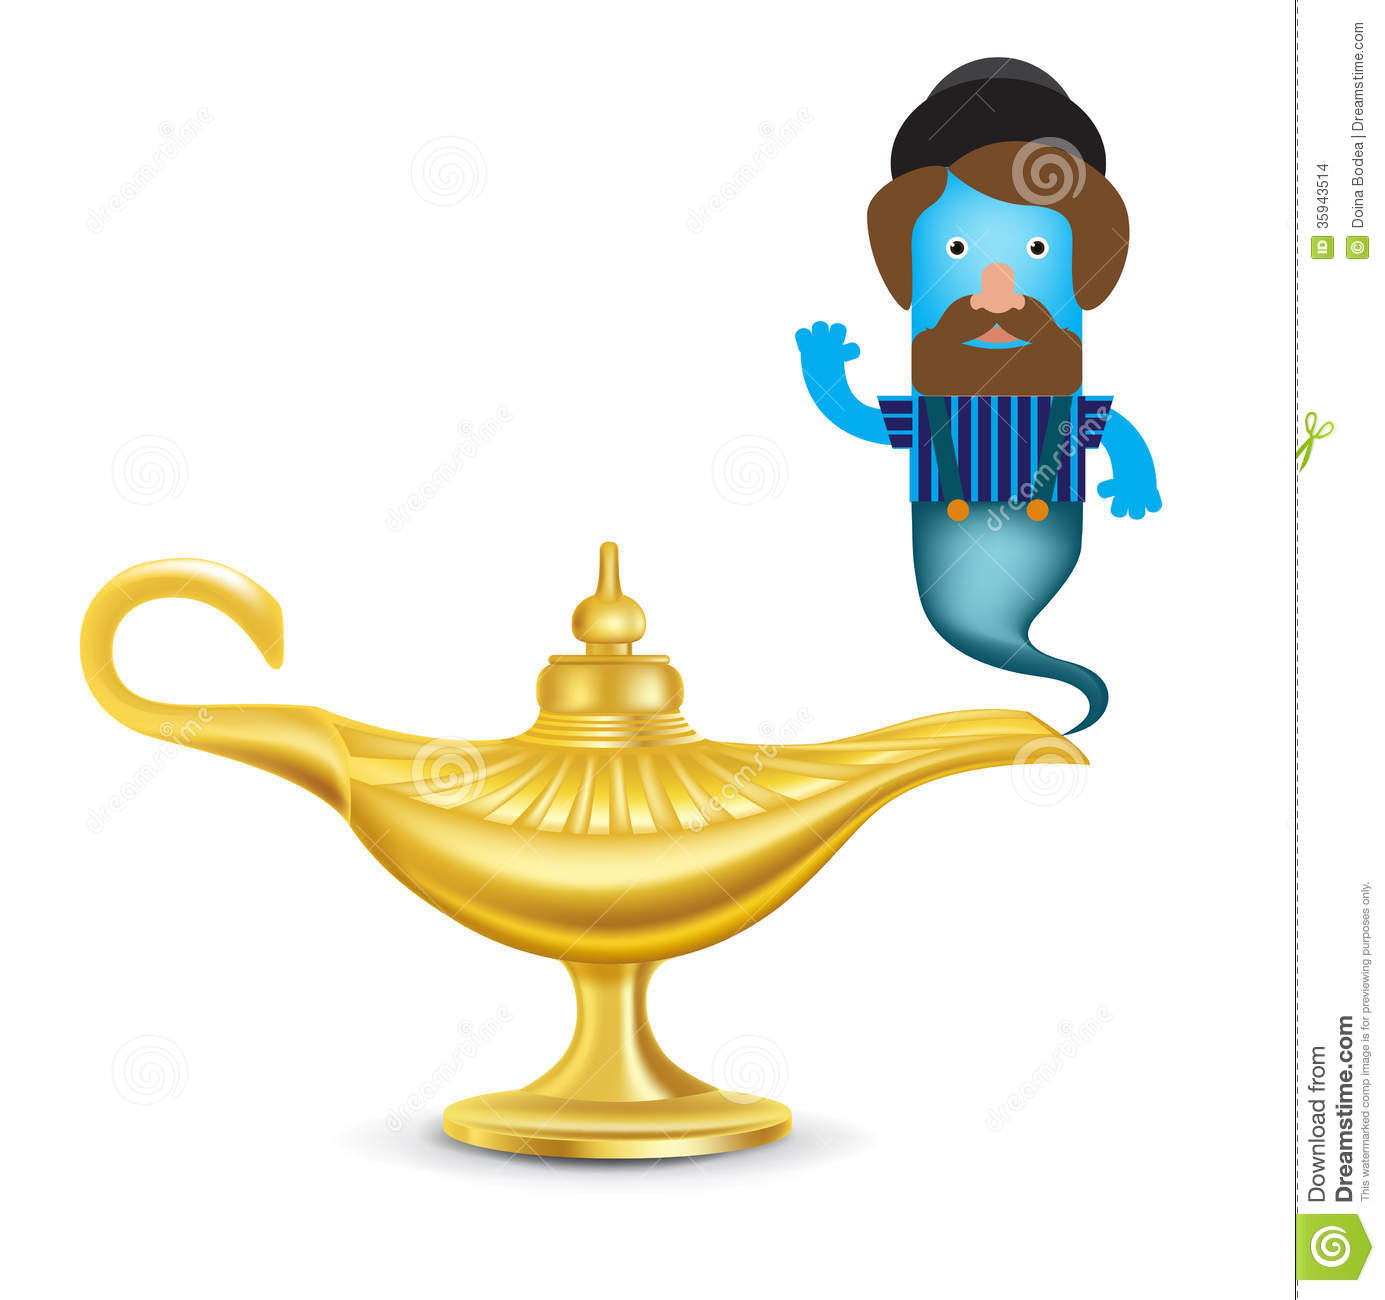 Golden Magic Lamp With Genie Isolated On White Stock Images   Image